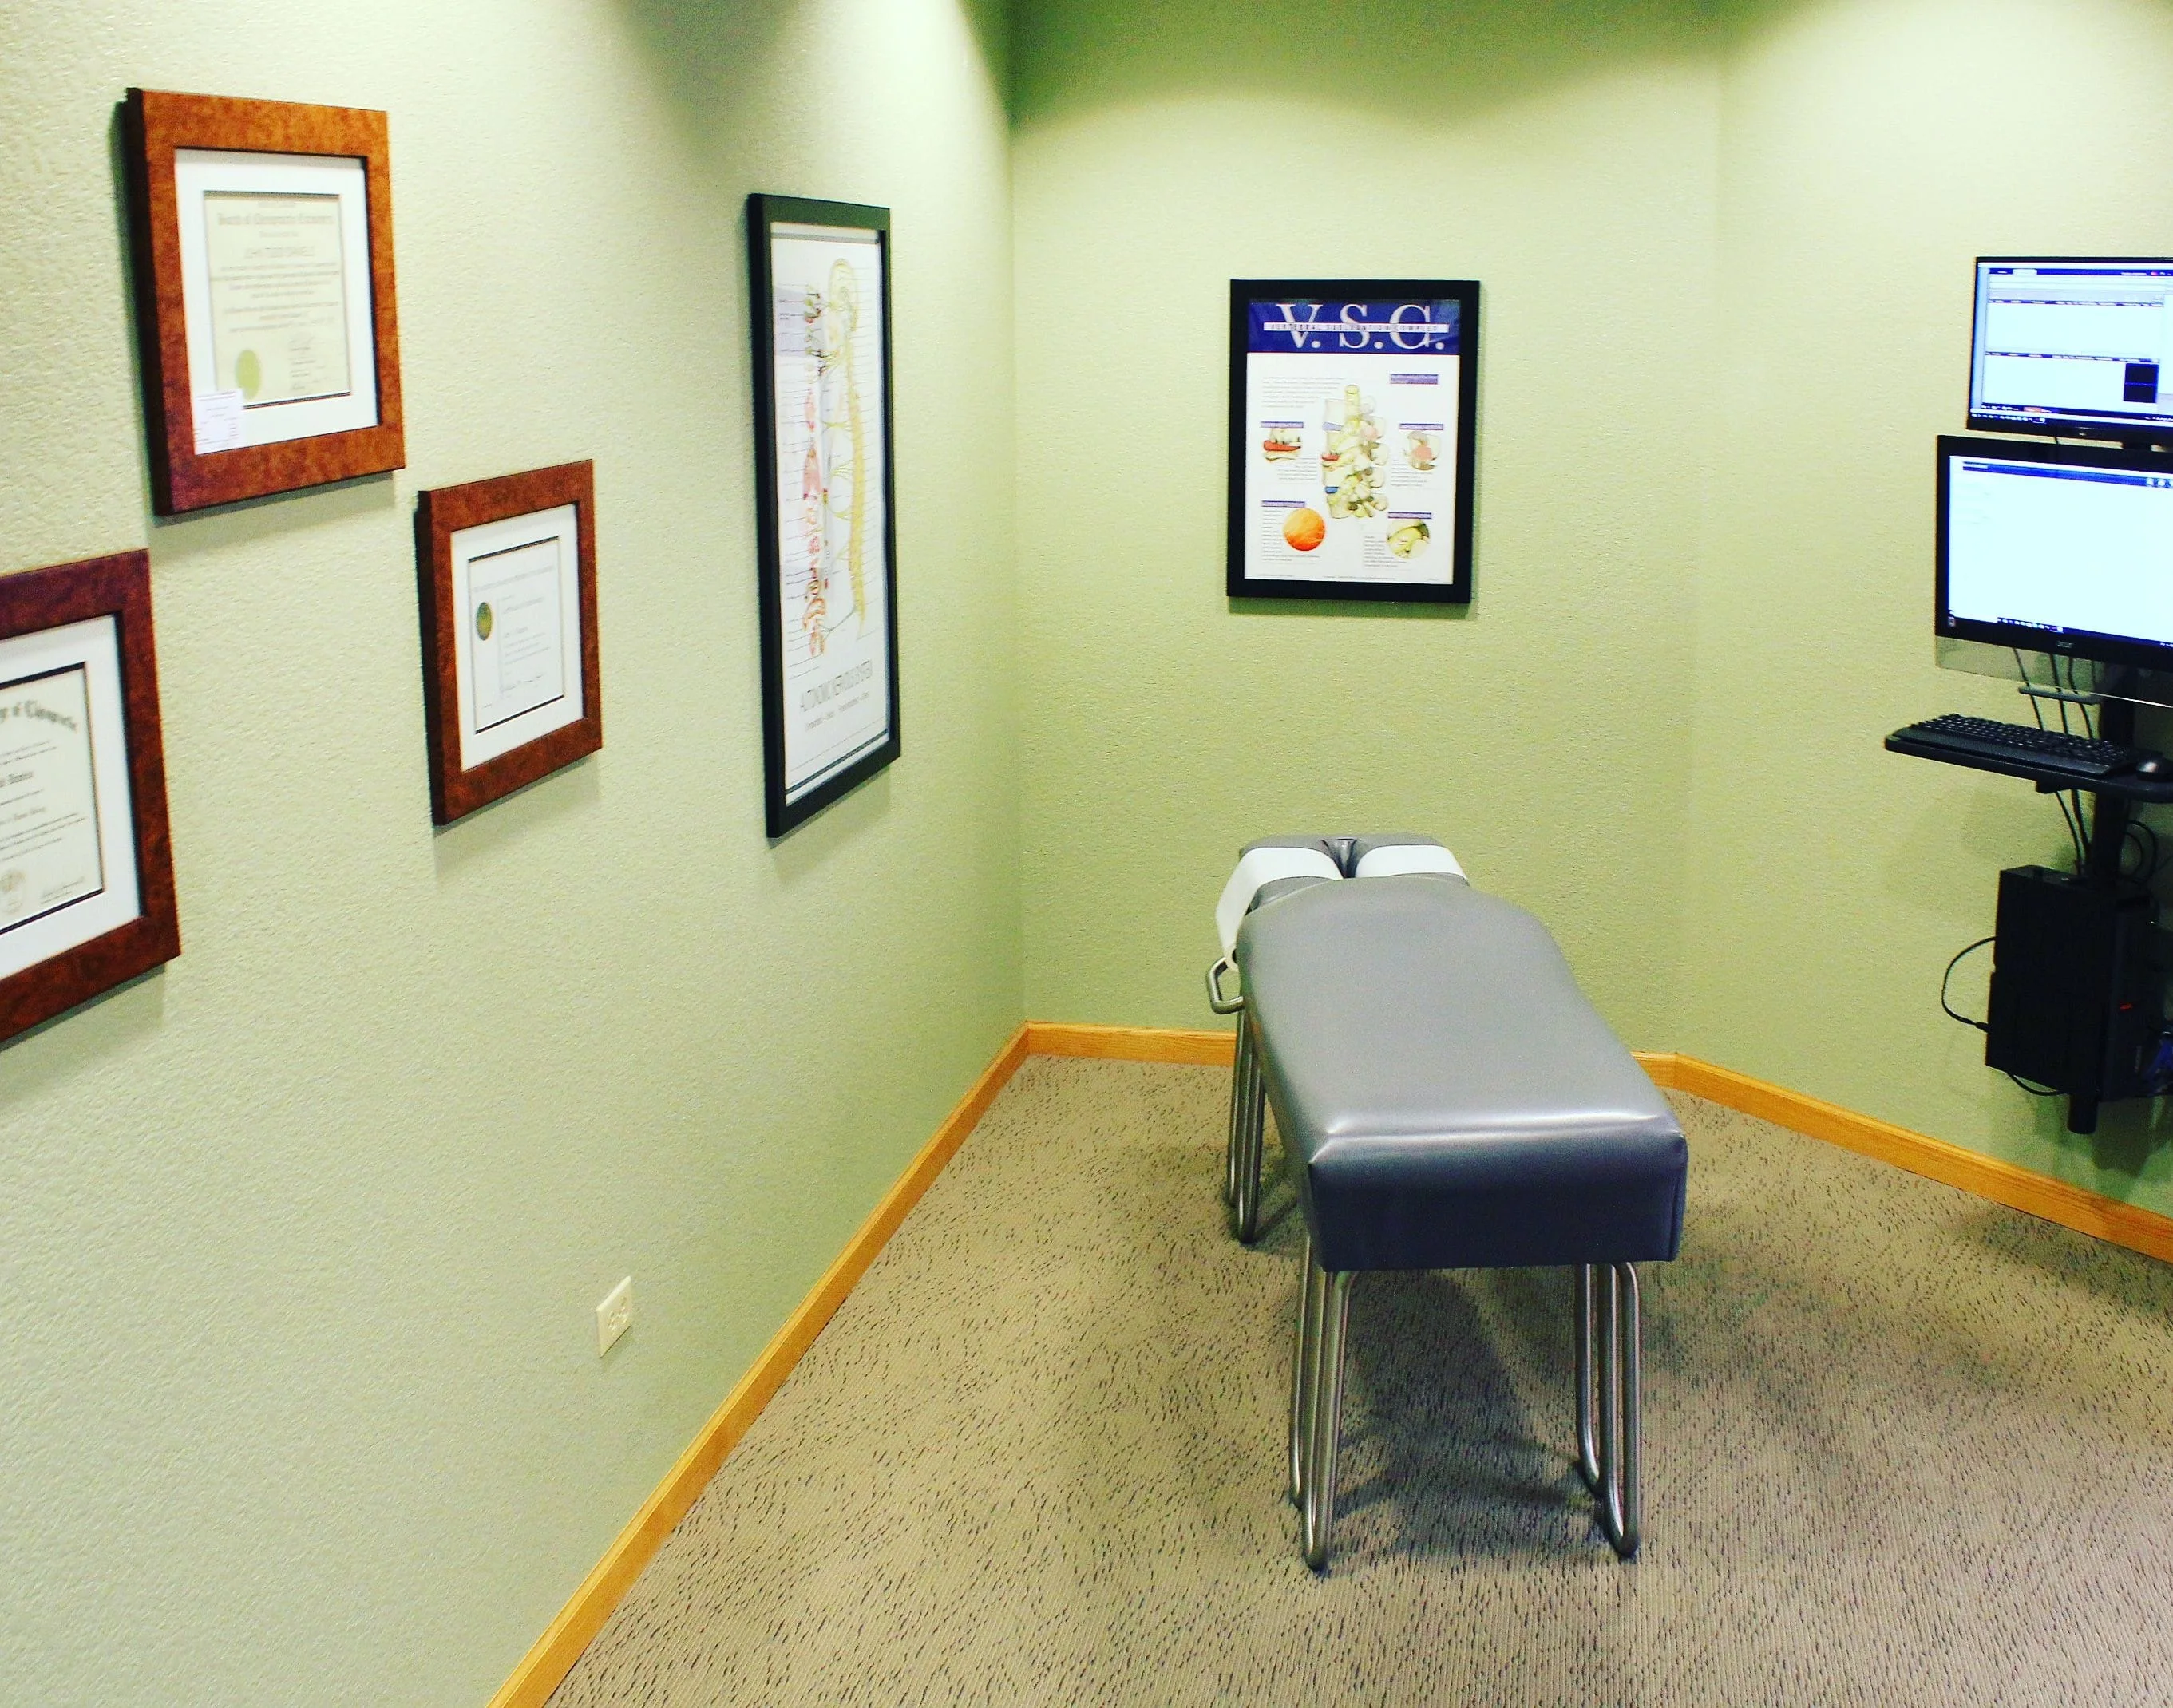 Daniels Chiropractic - Chiropractor in Denver, CO US :: Virtual Office Tour